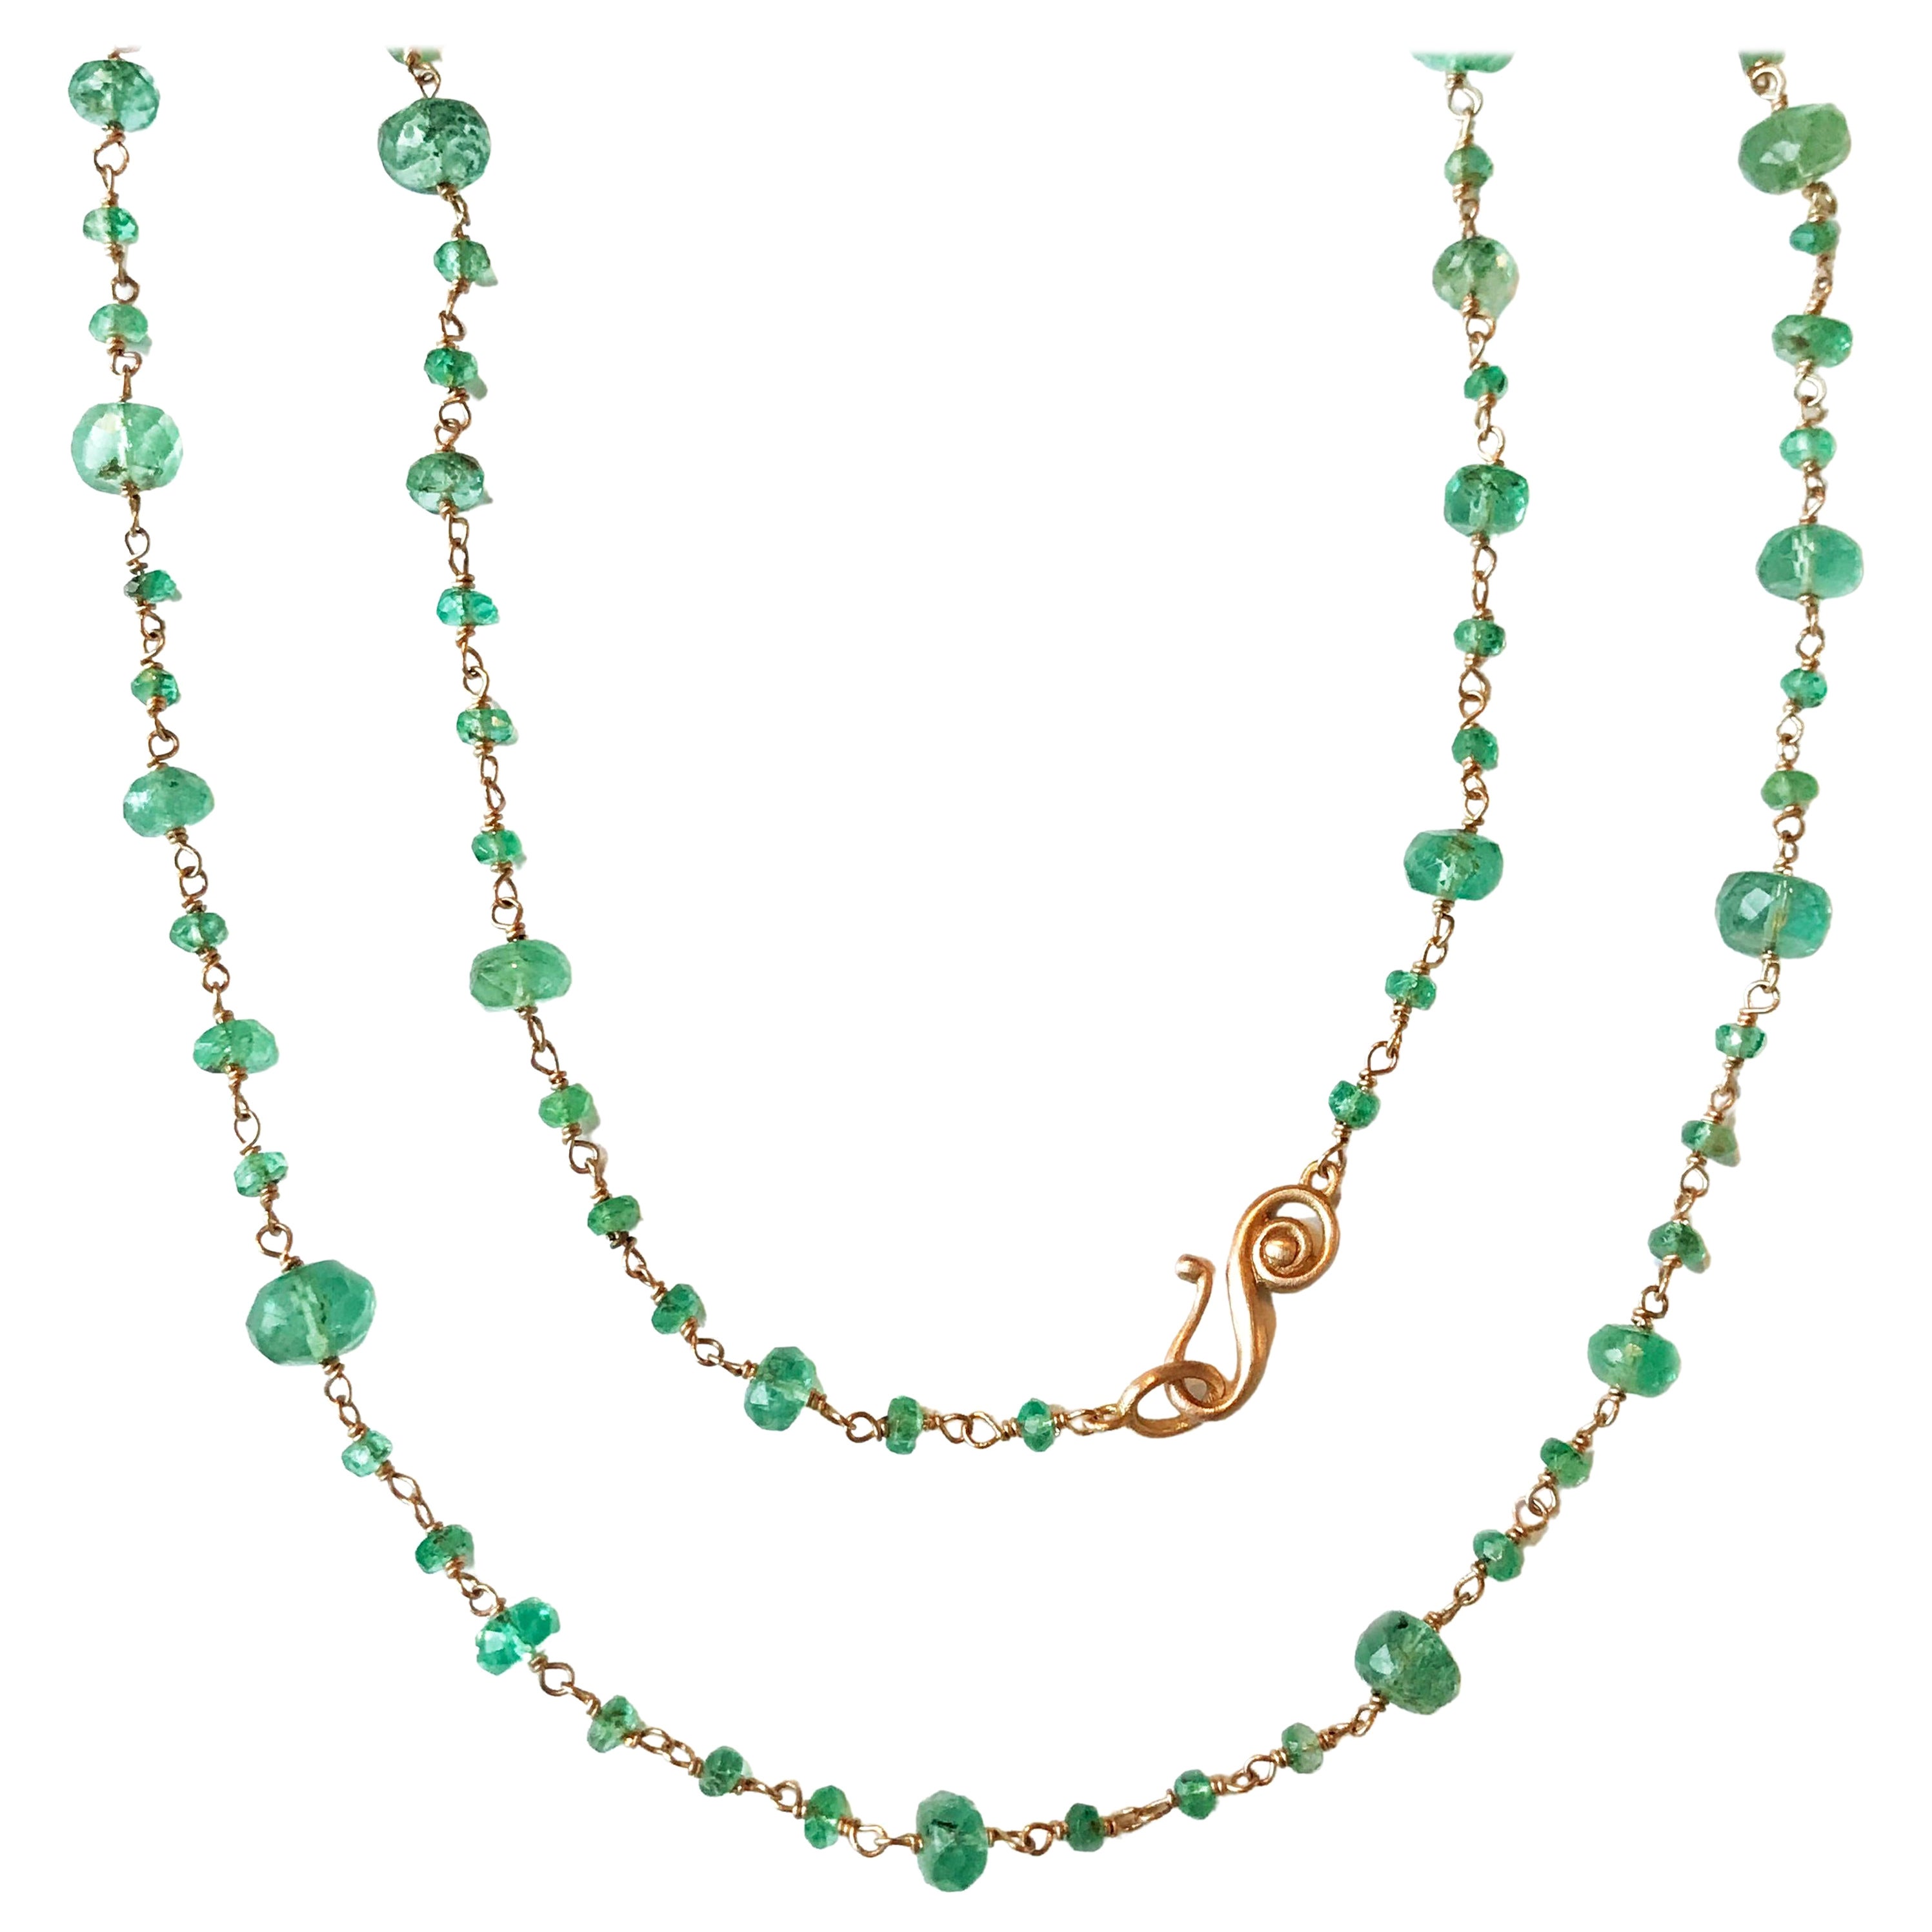 Dalben Emerald Beads Rose Gold Necklace